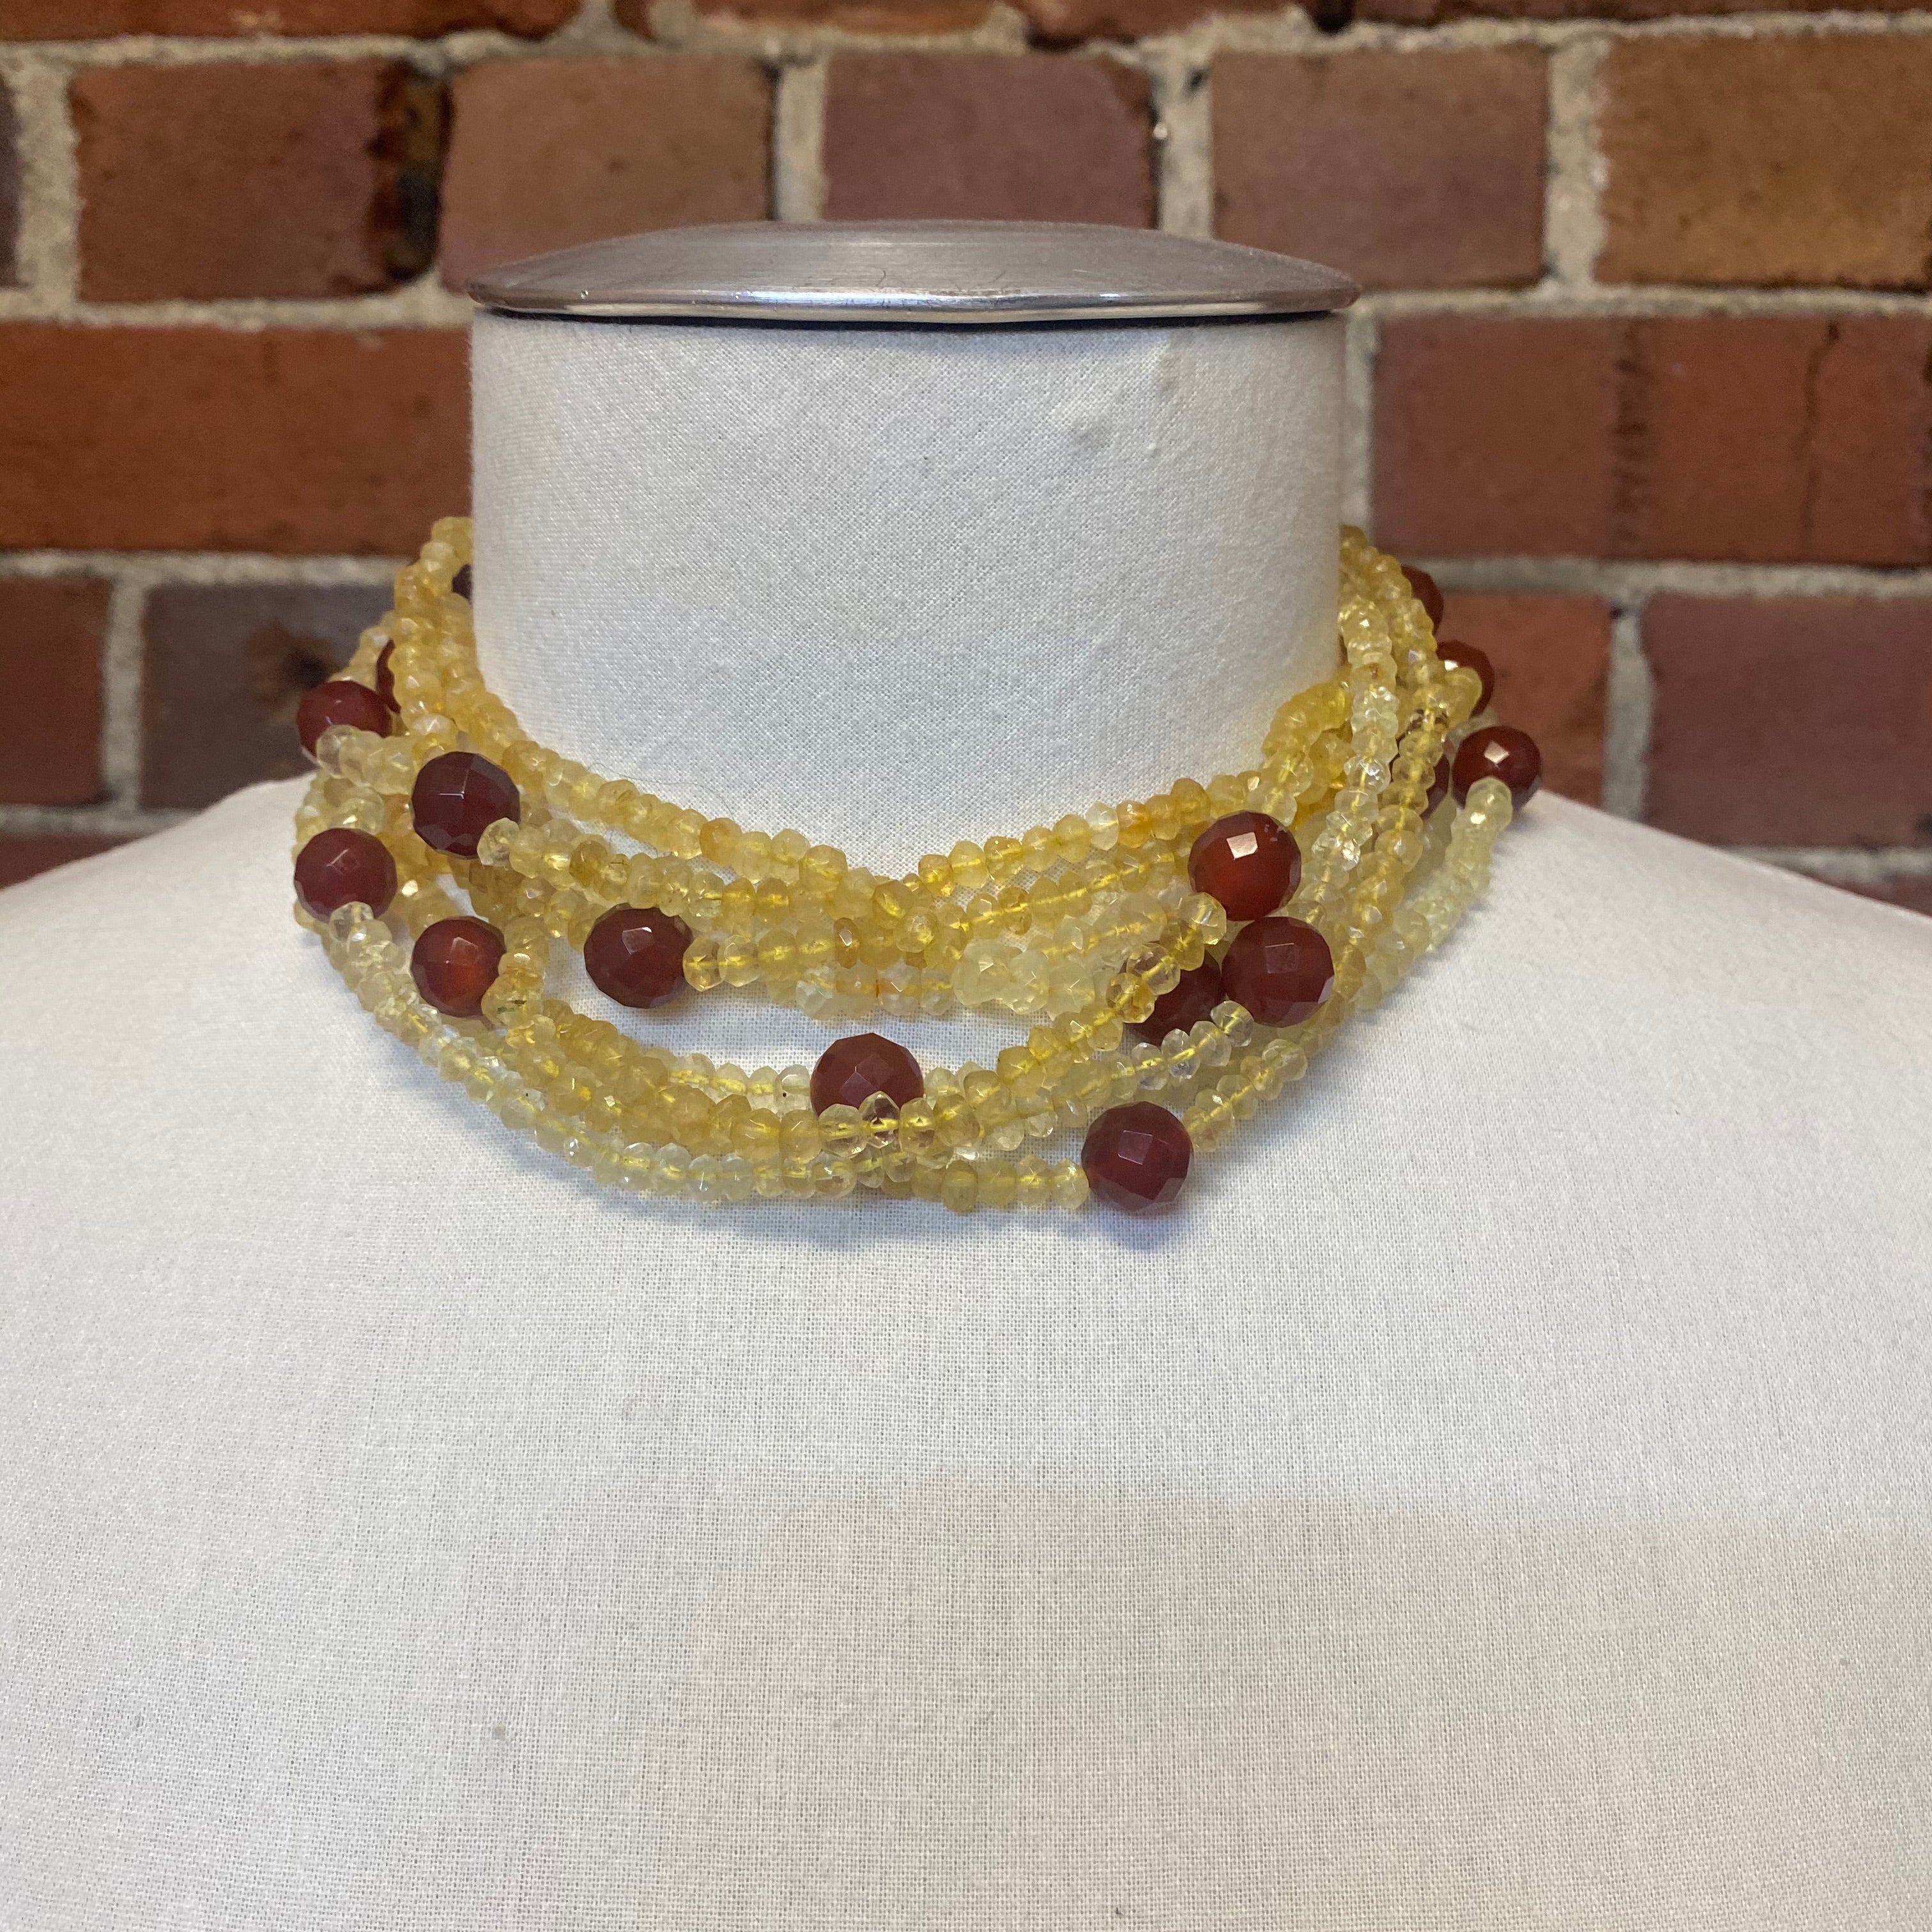 CARNELIAN and Glass Bead necklace set